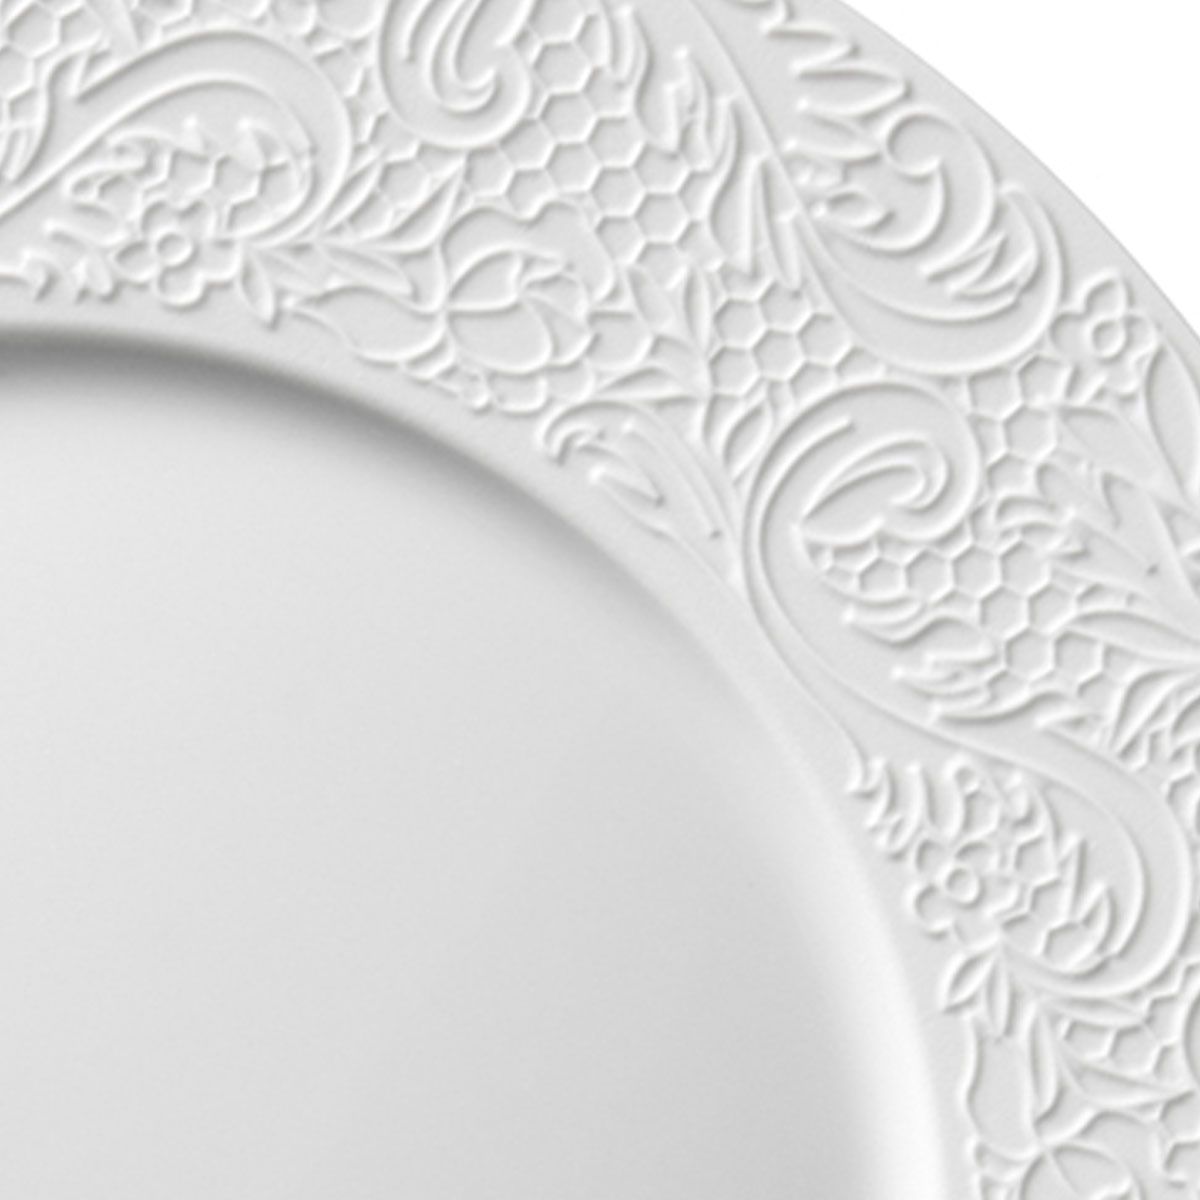 Round presentation plate 32 cm Degrenne L Couture Collection